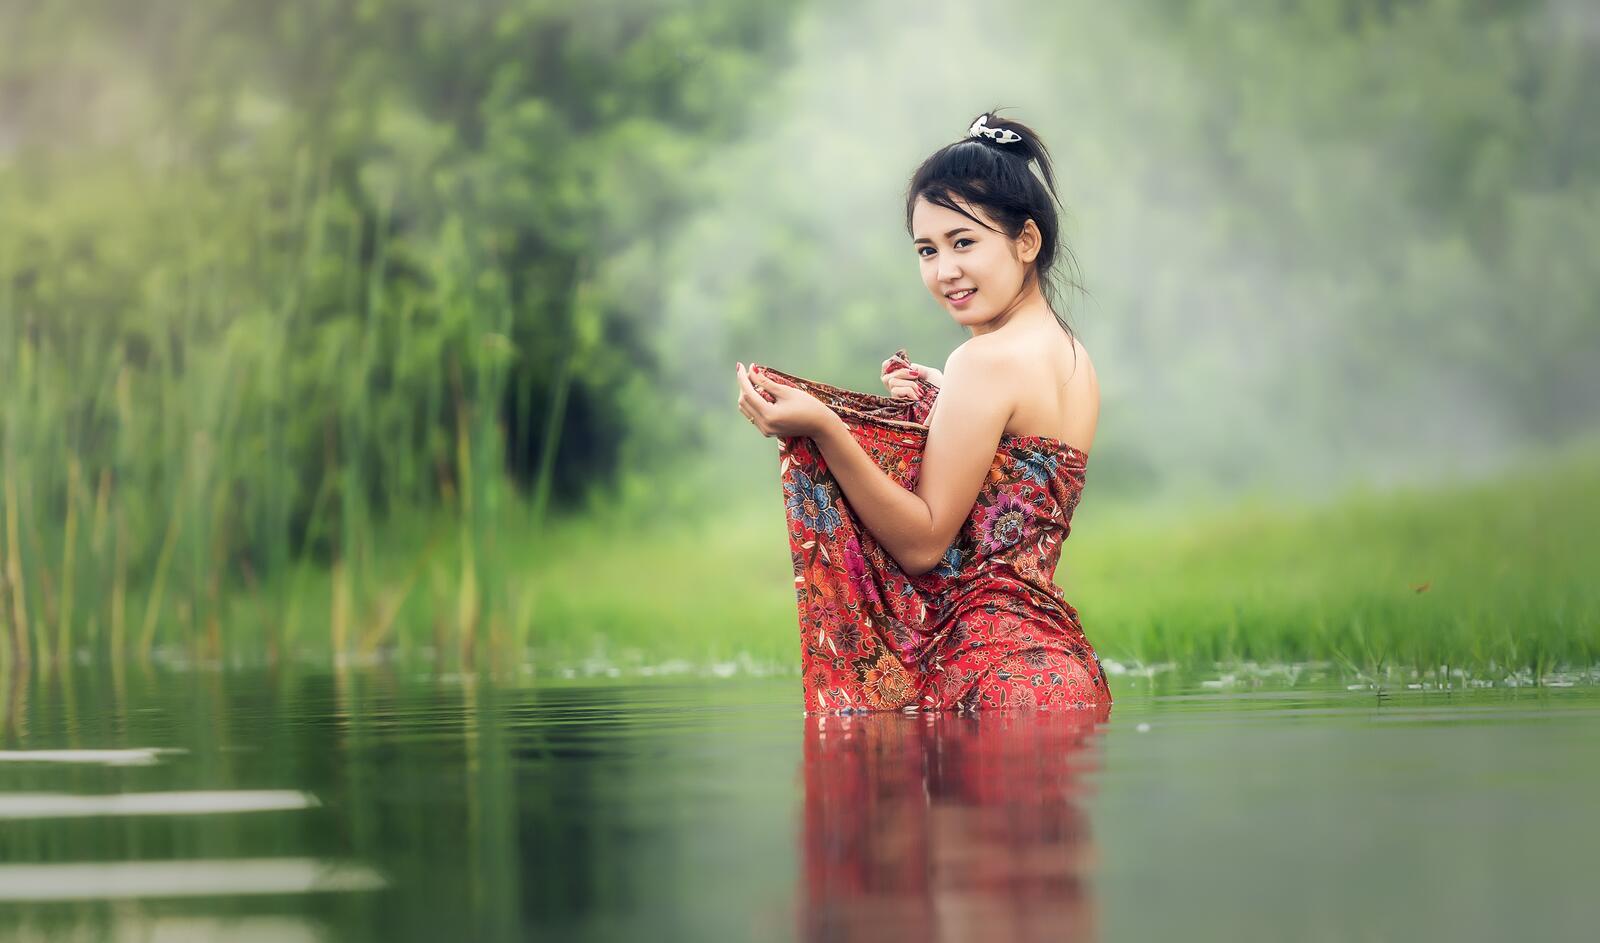 Free photo Asian woman in a red dress standing in the water